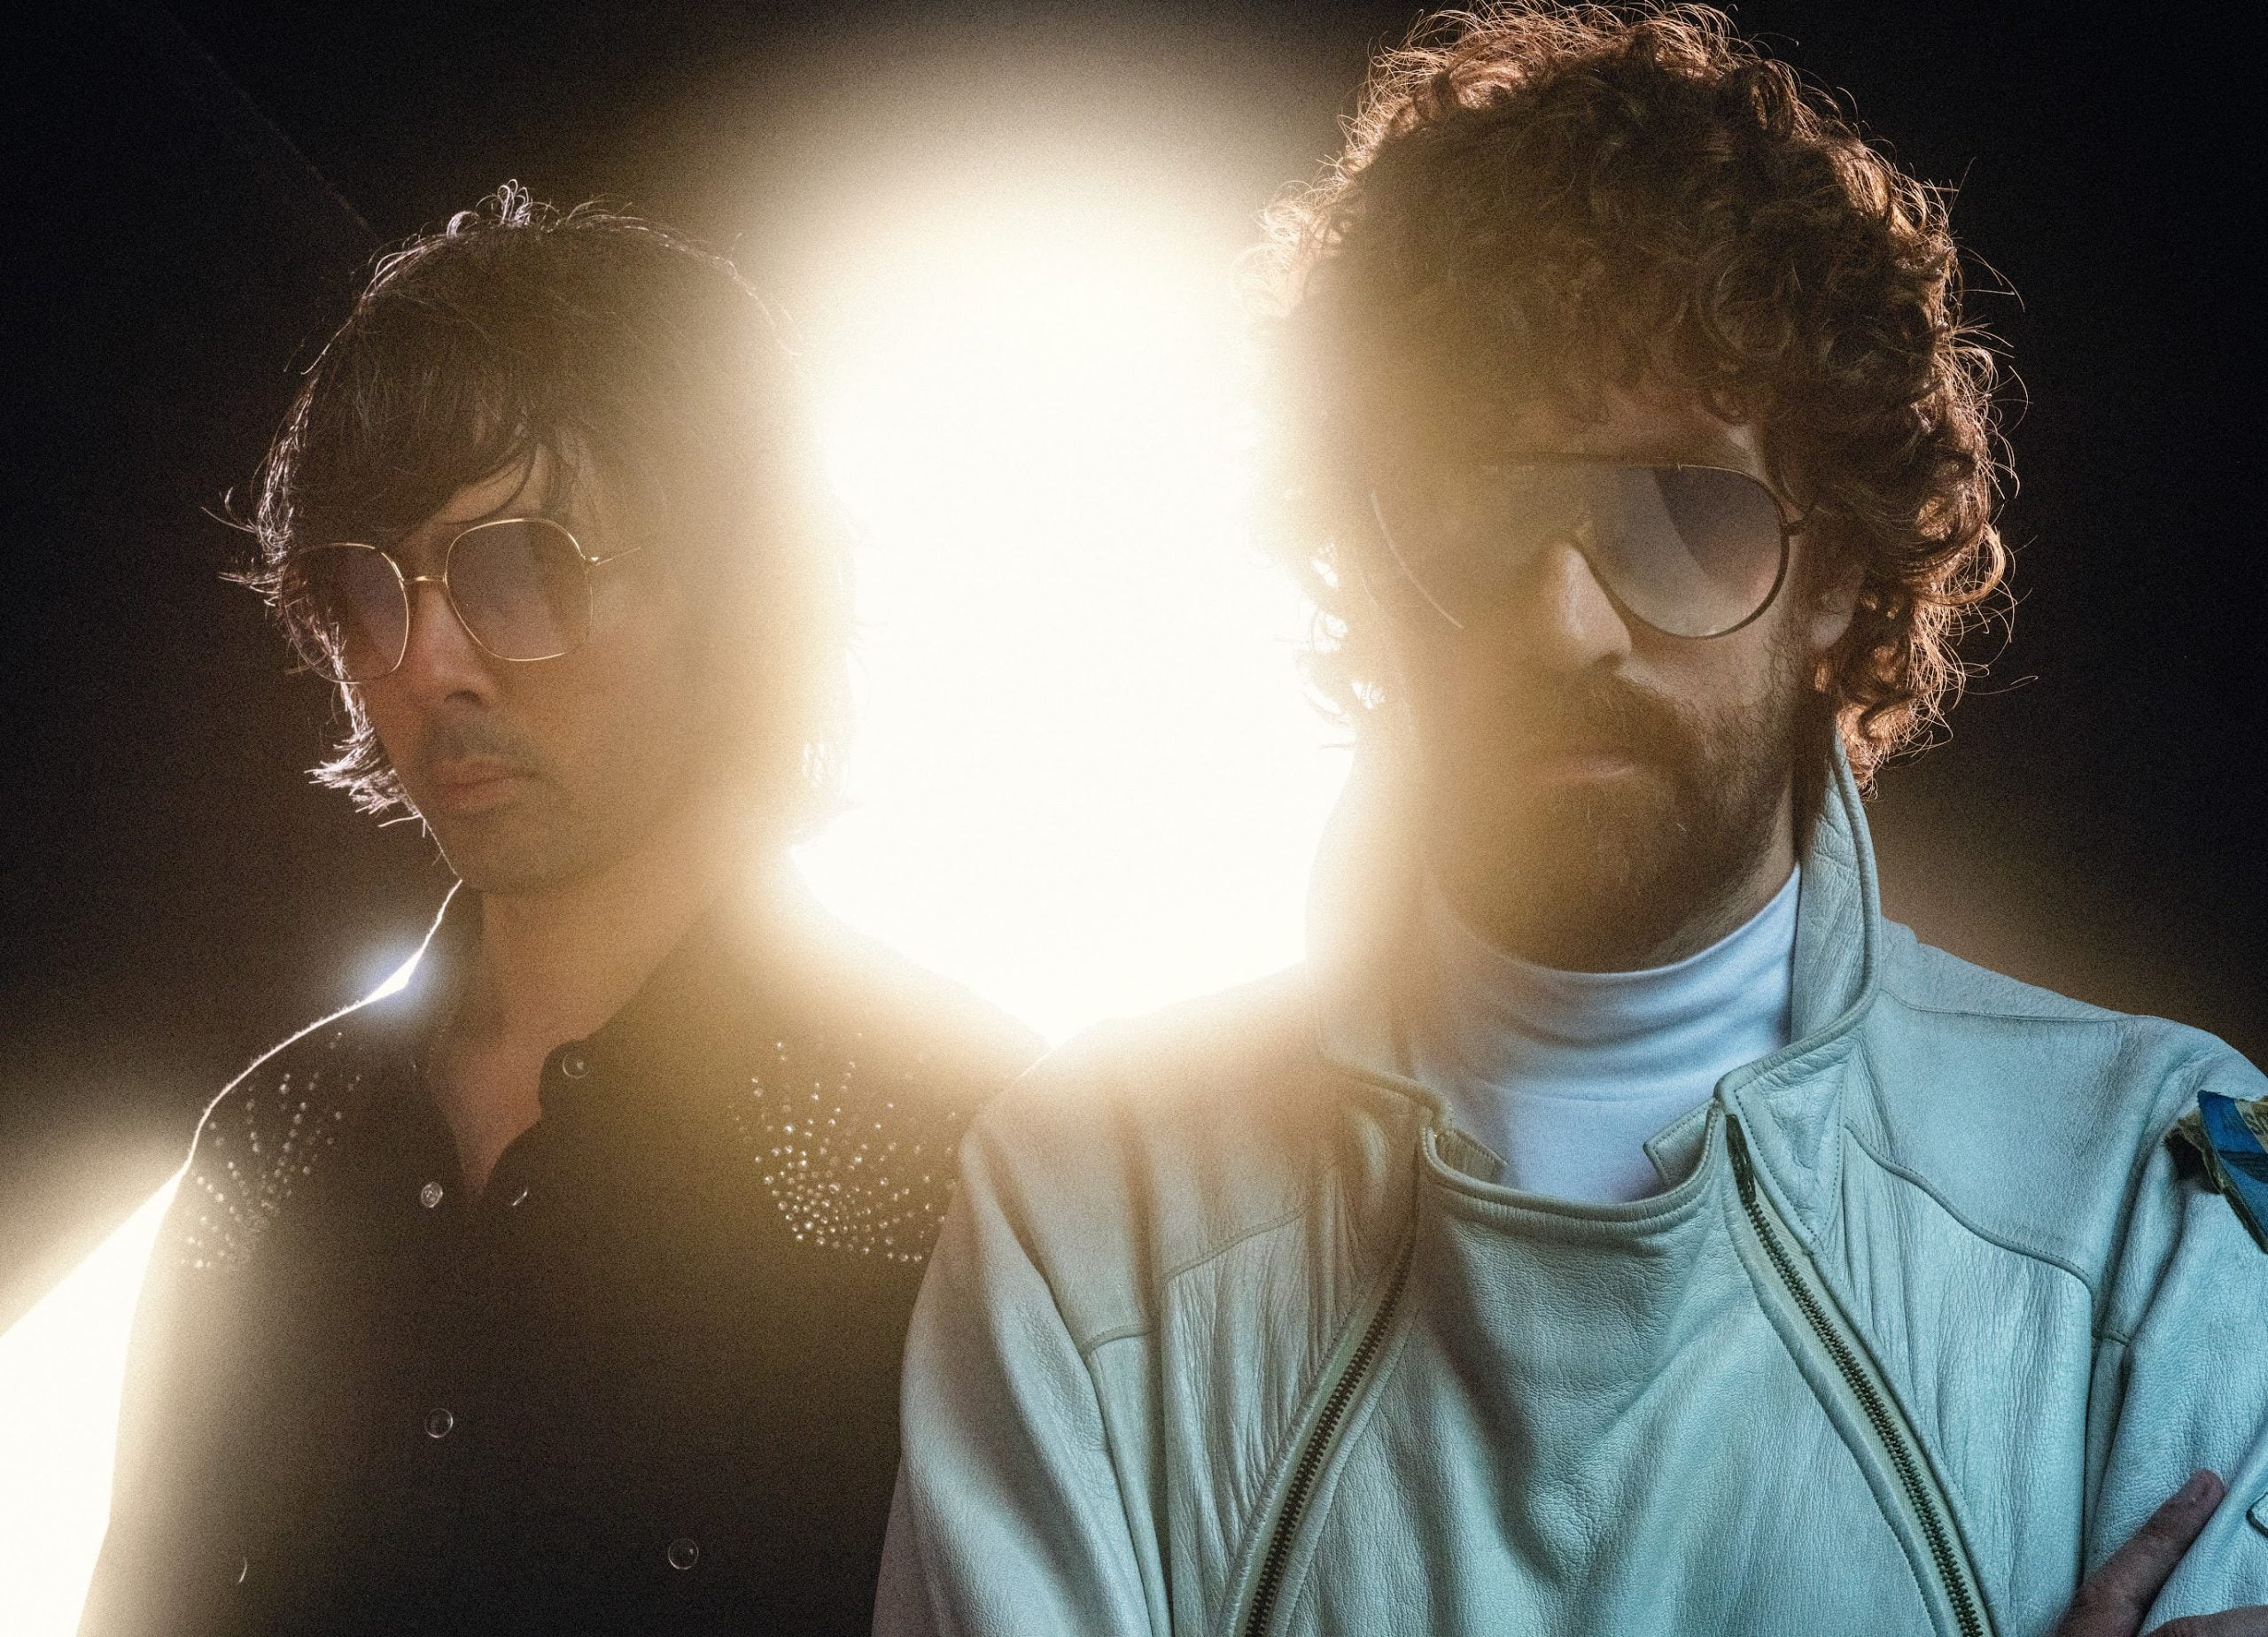 Justice continues album push with NSFW video for ‘Generator’: Watch